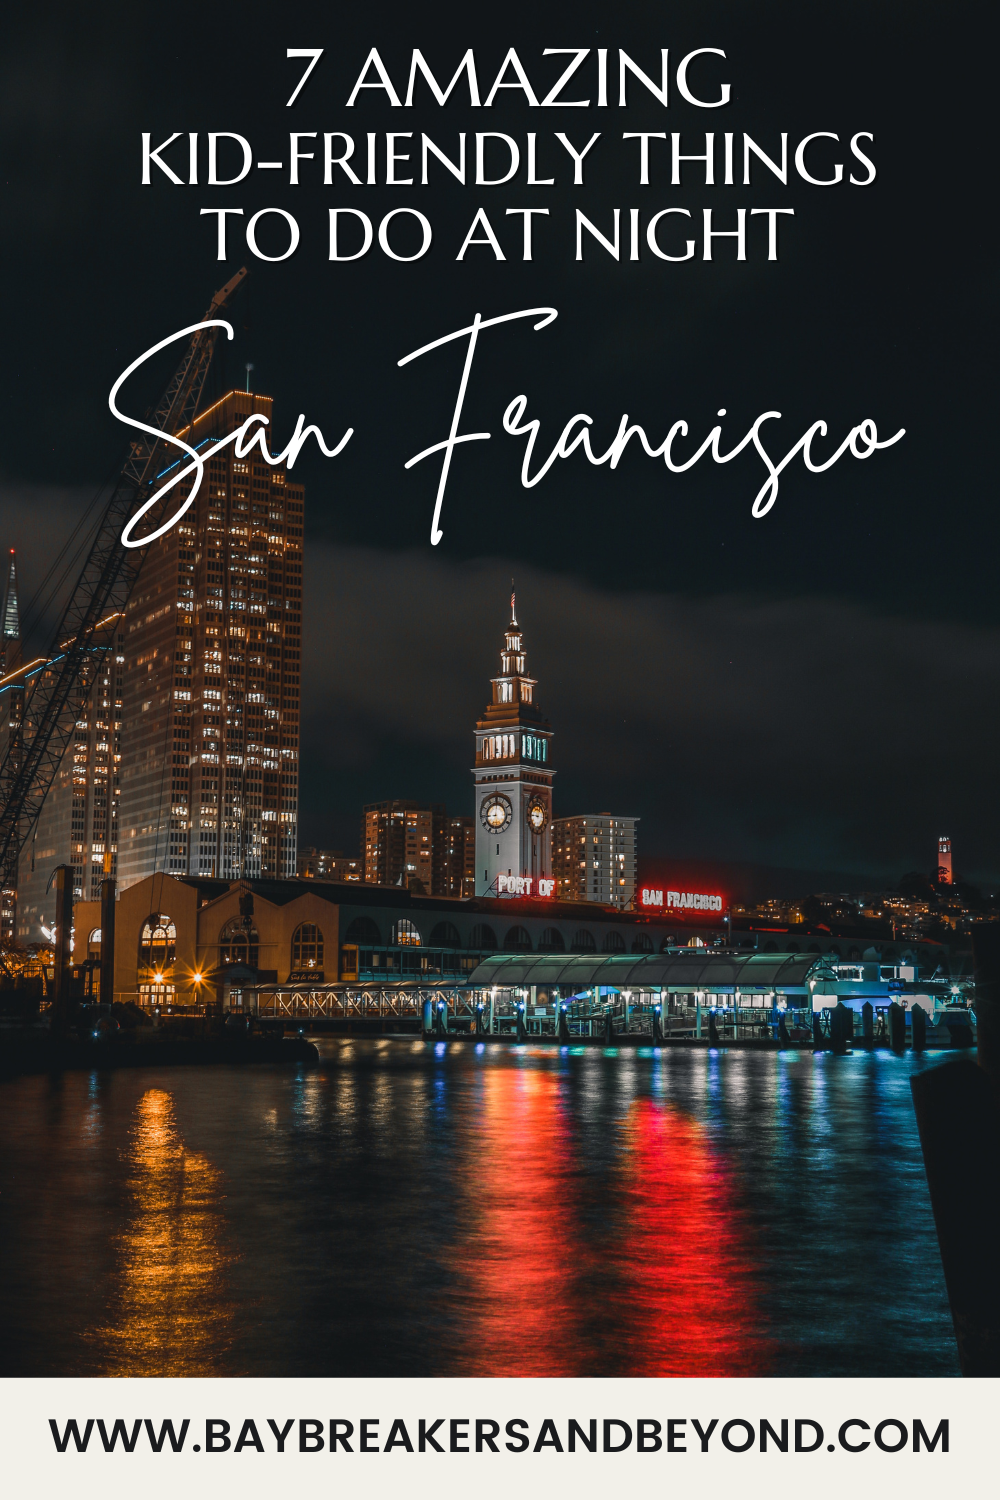 7 amazing kid-friendly things to do at night in San Francisco